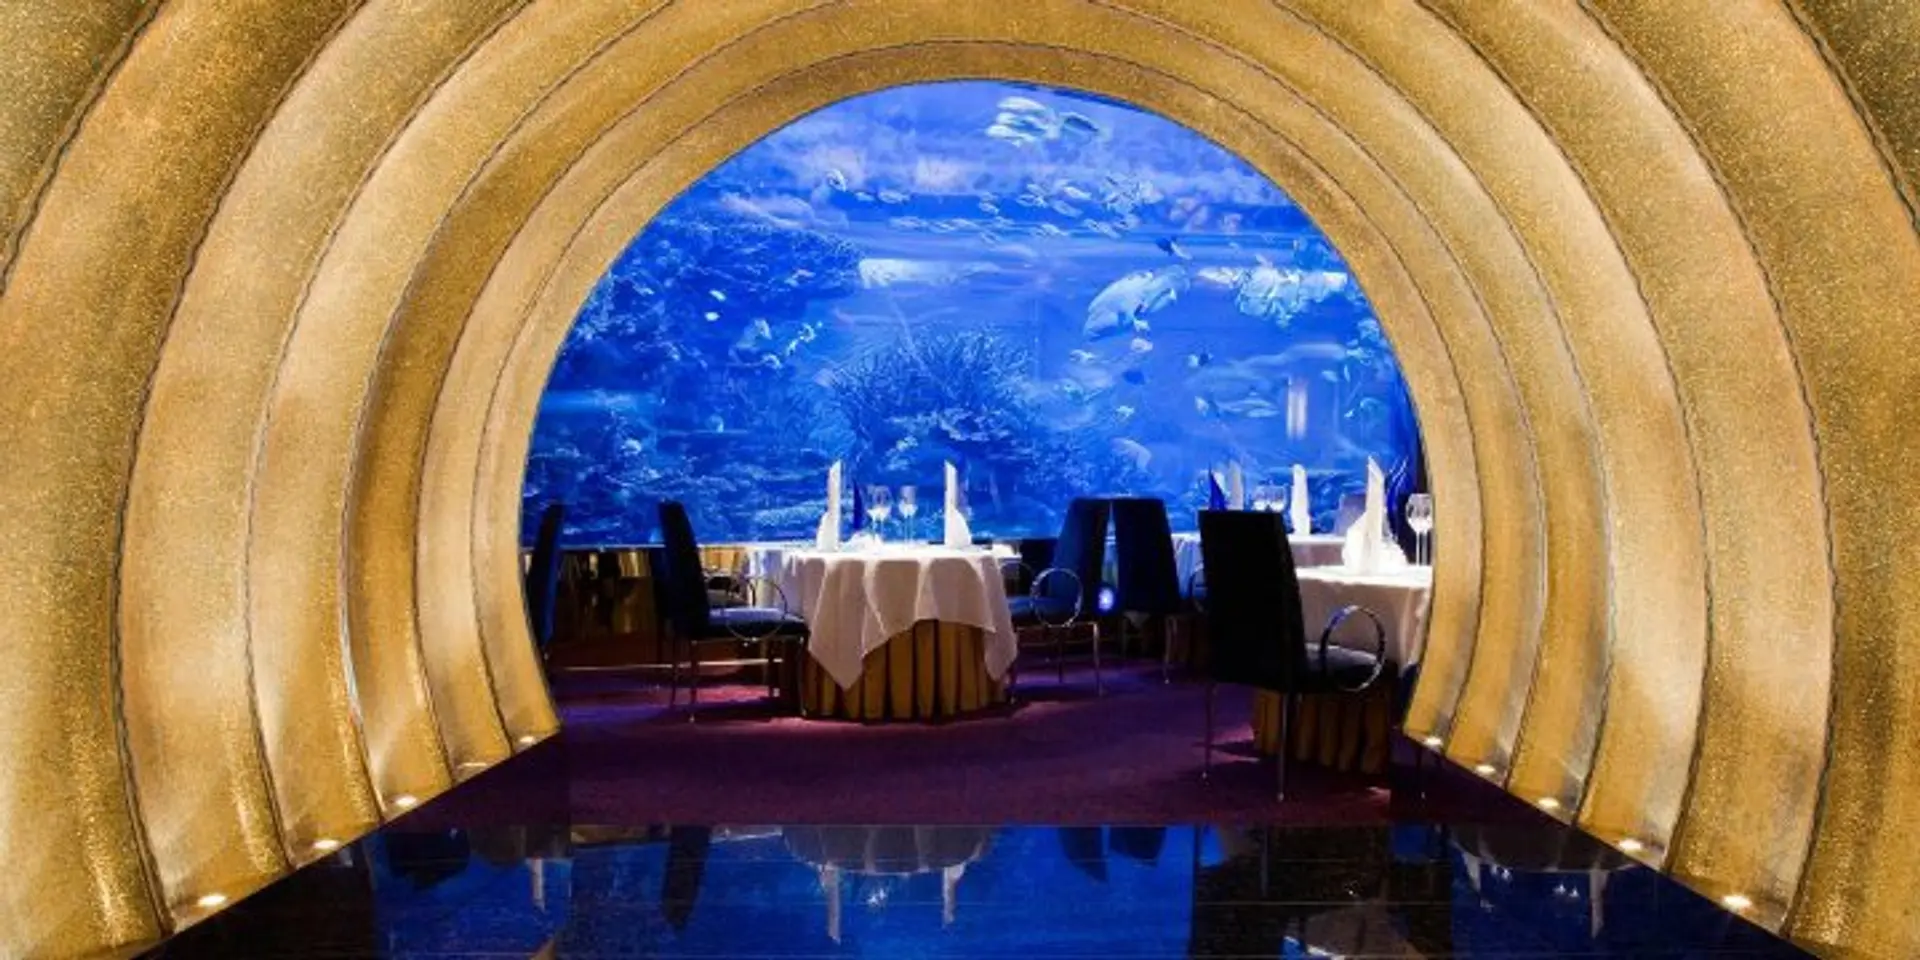 Dining Toplists - The World’s Finest Underwater Dining Experiences